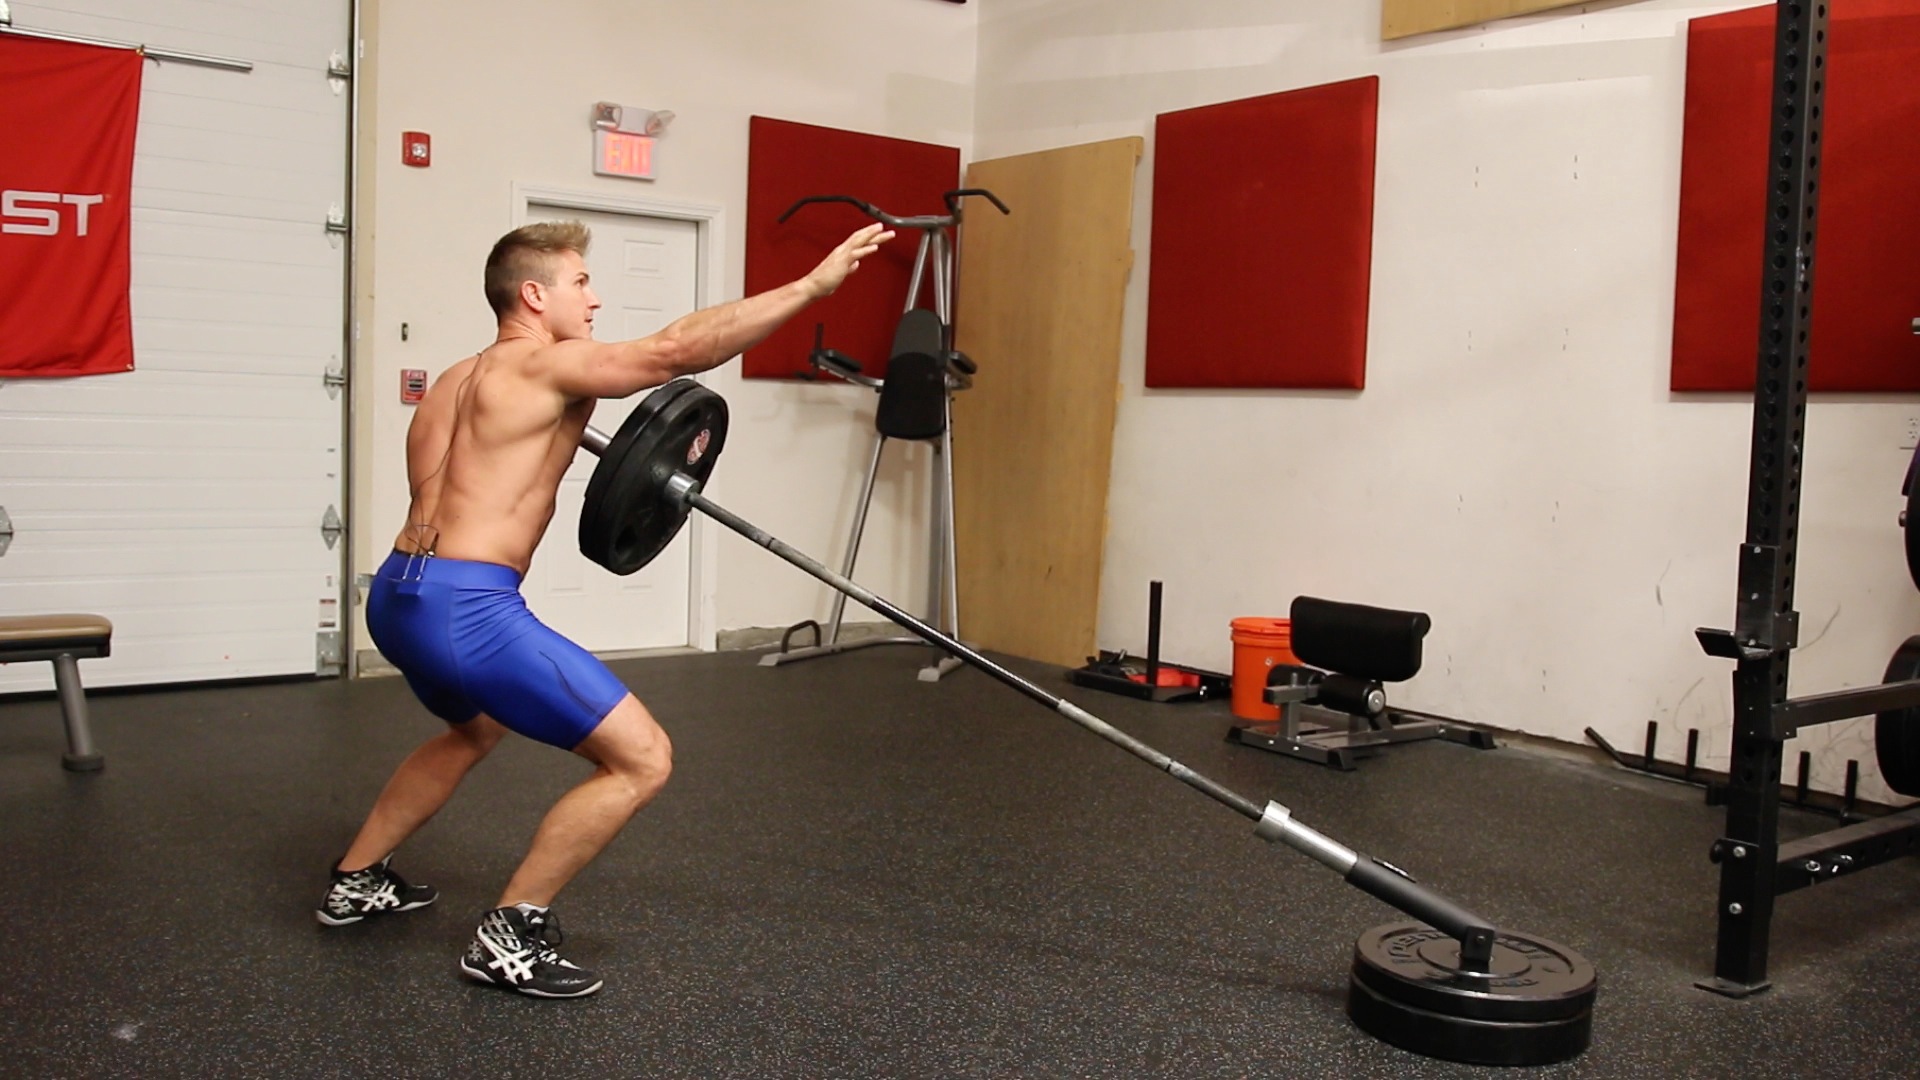 How To: Landmine Chest Press - Muscular Strength